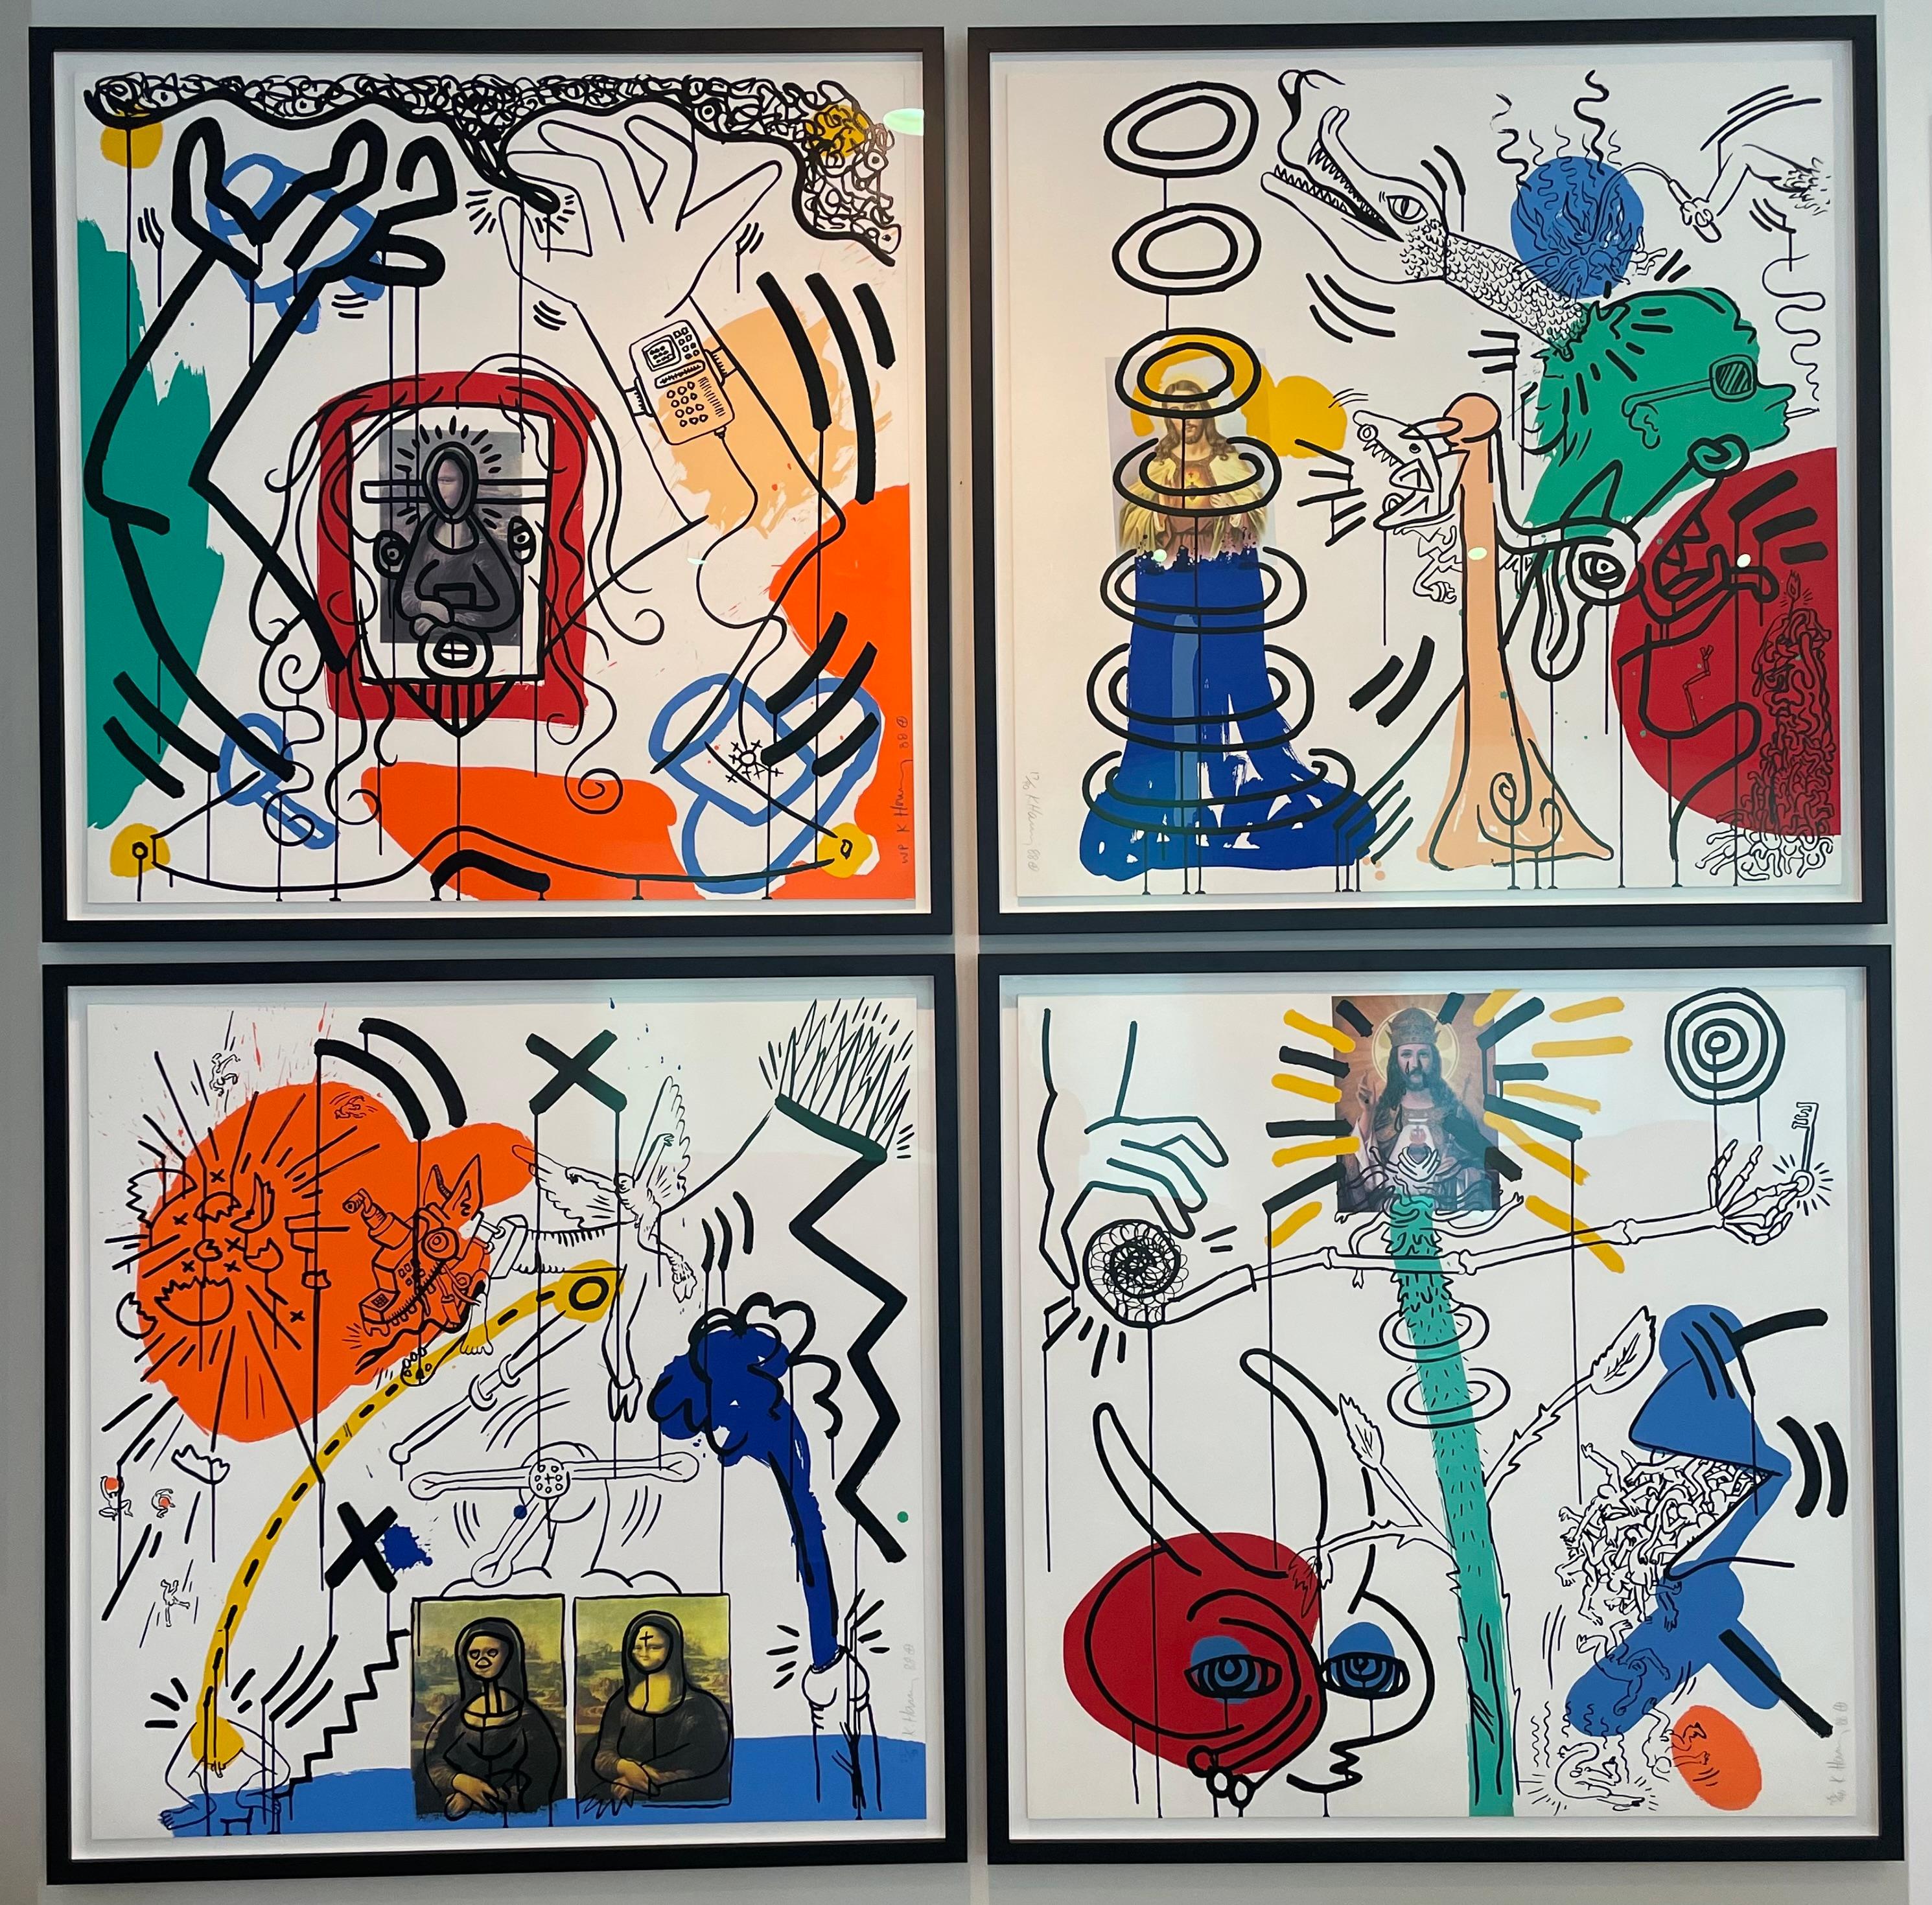 Artist: Keith Haring 
Title: Apocalypse 10
Size:  38 × 38 in  96.5 × 96.5 cm
Medium: Screenprint in colors on Lenox Museum Board
Edition: 75 of 90 
Year: 1988
Notes: Hand-signed by artist, Signed, numbered, and dated in pencil. Published by George